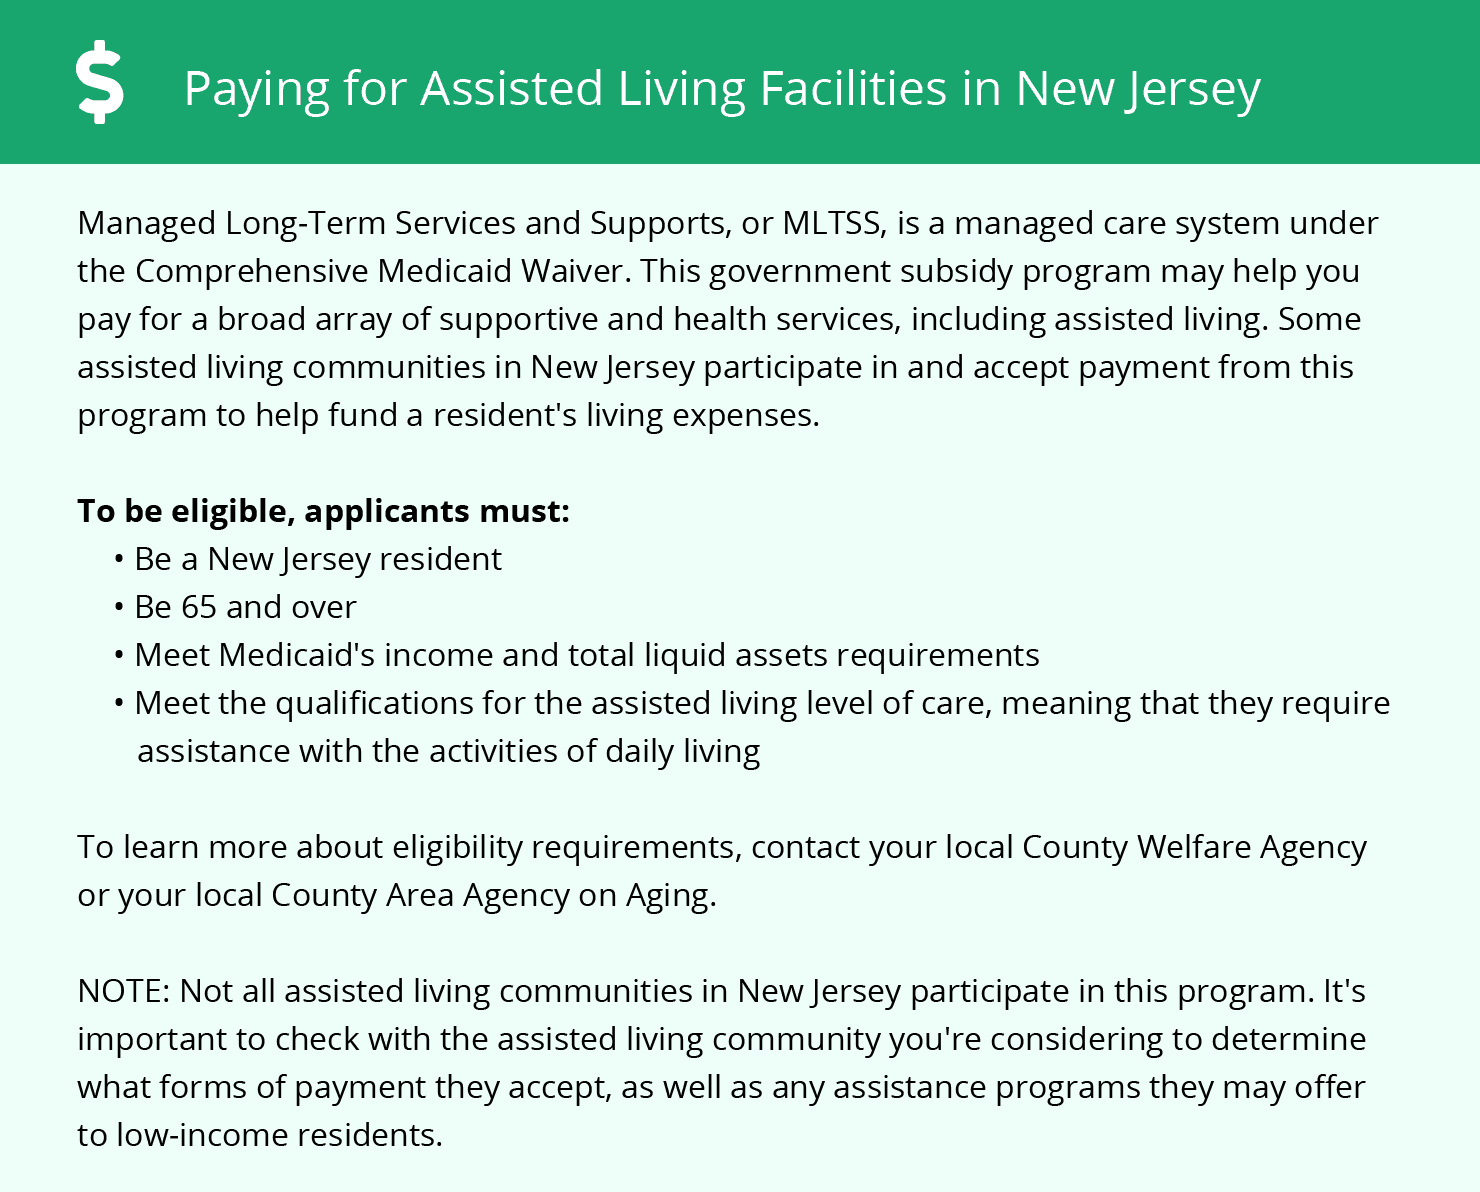 Paying for Assisted Living Facilities in New Jersey